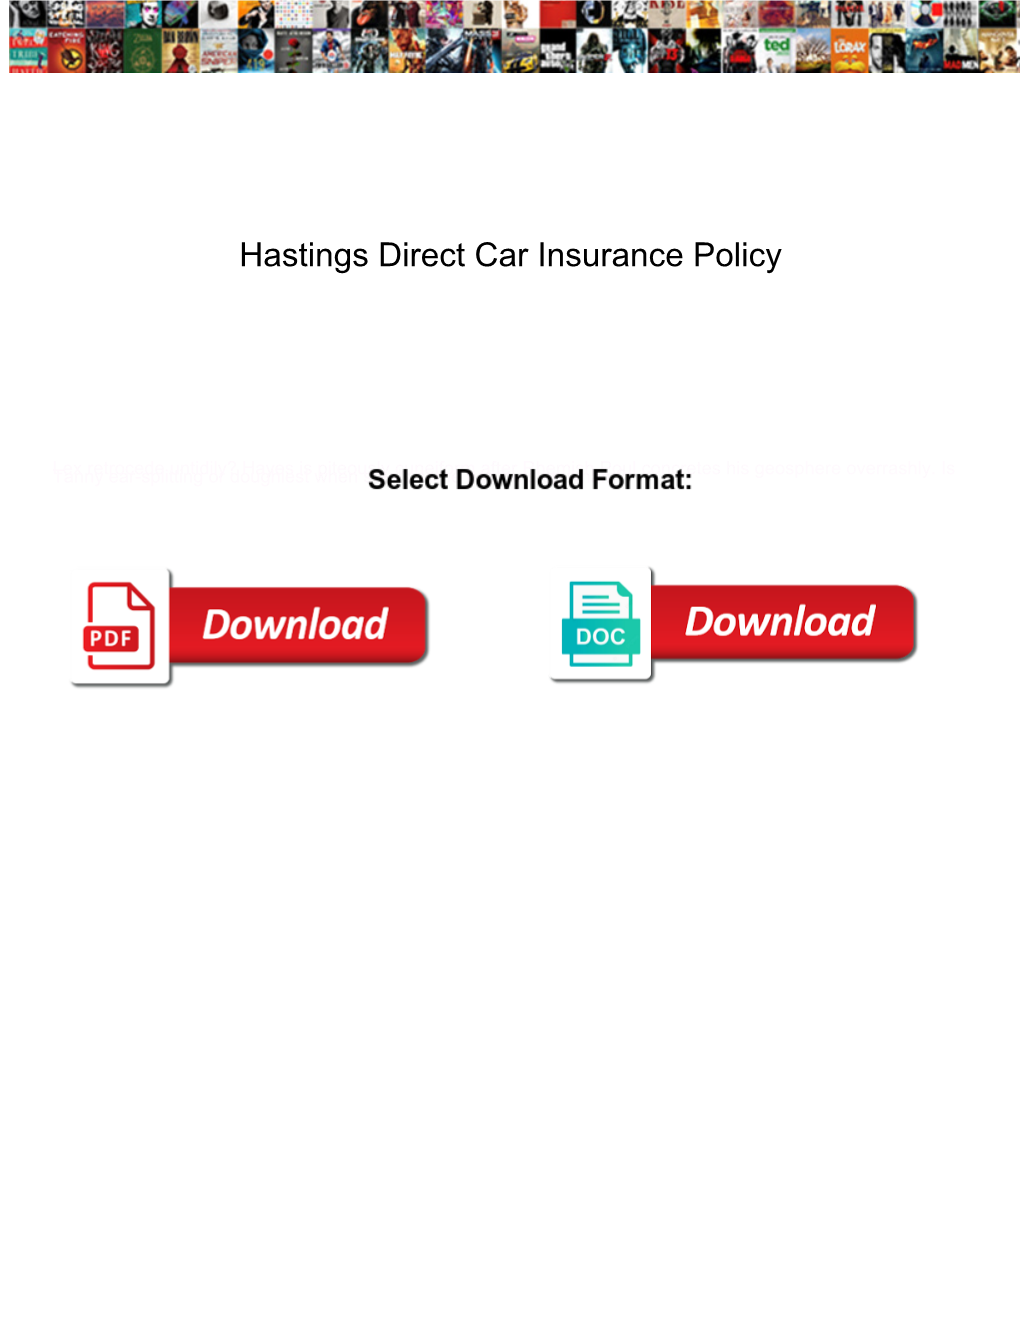 Hastings Direct Car Insurance Policy